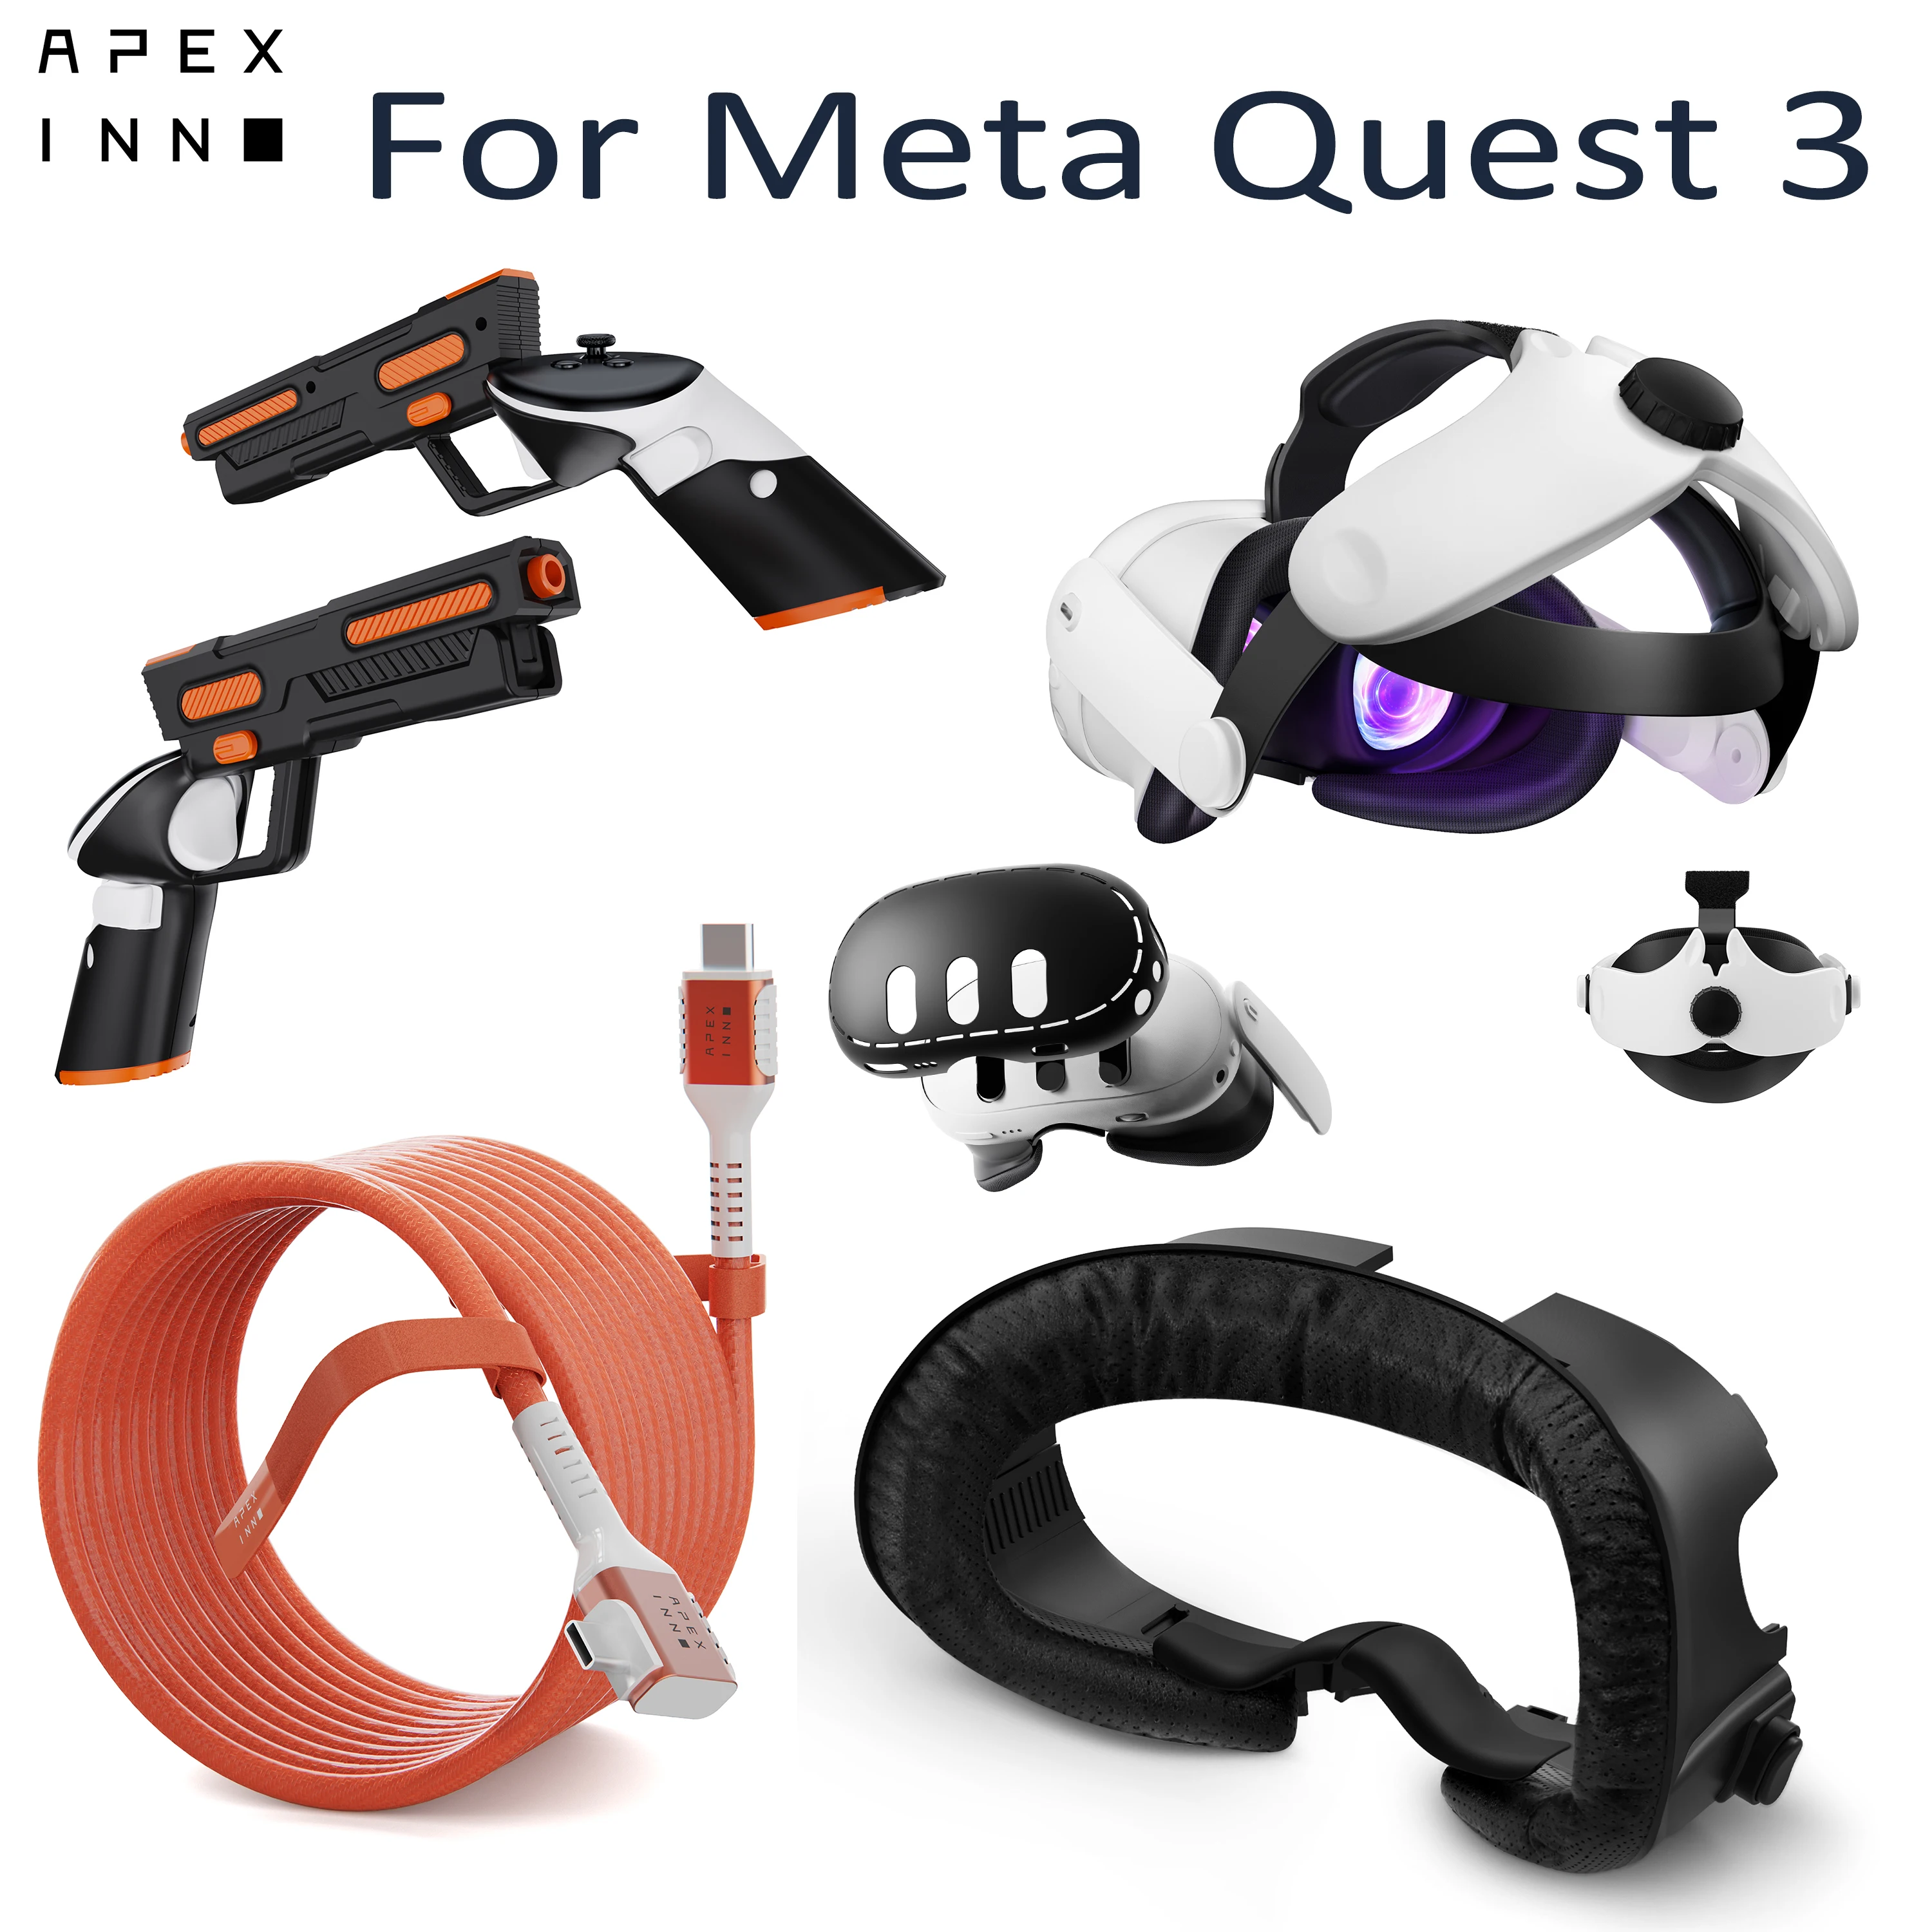 

APEXINNO VR Facial Interface 20FT Link Cable Gun Stock Cover Head Strap Silicone Shell Cover For Meta Quest 3 VR Accessories